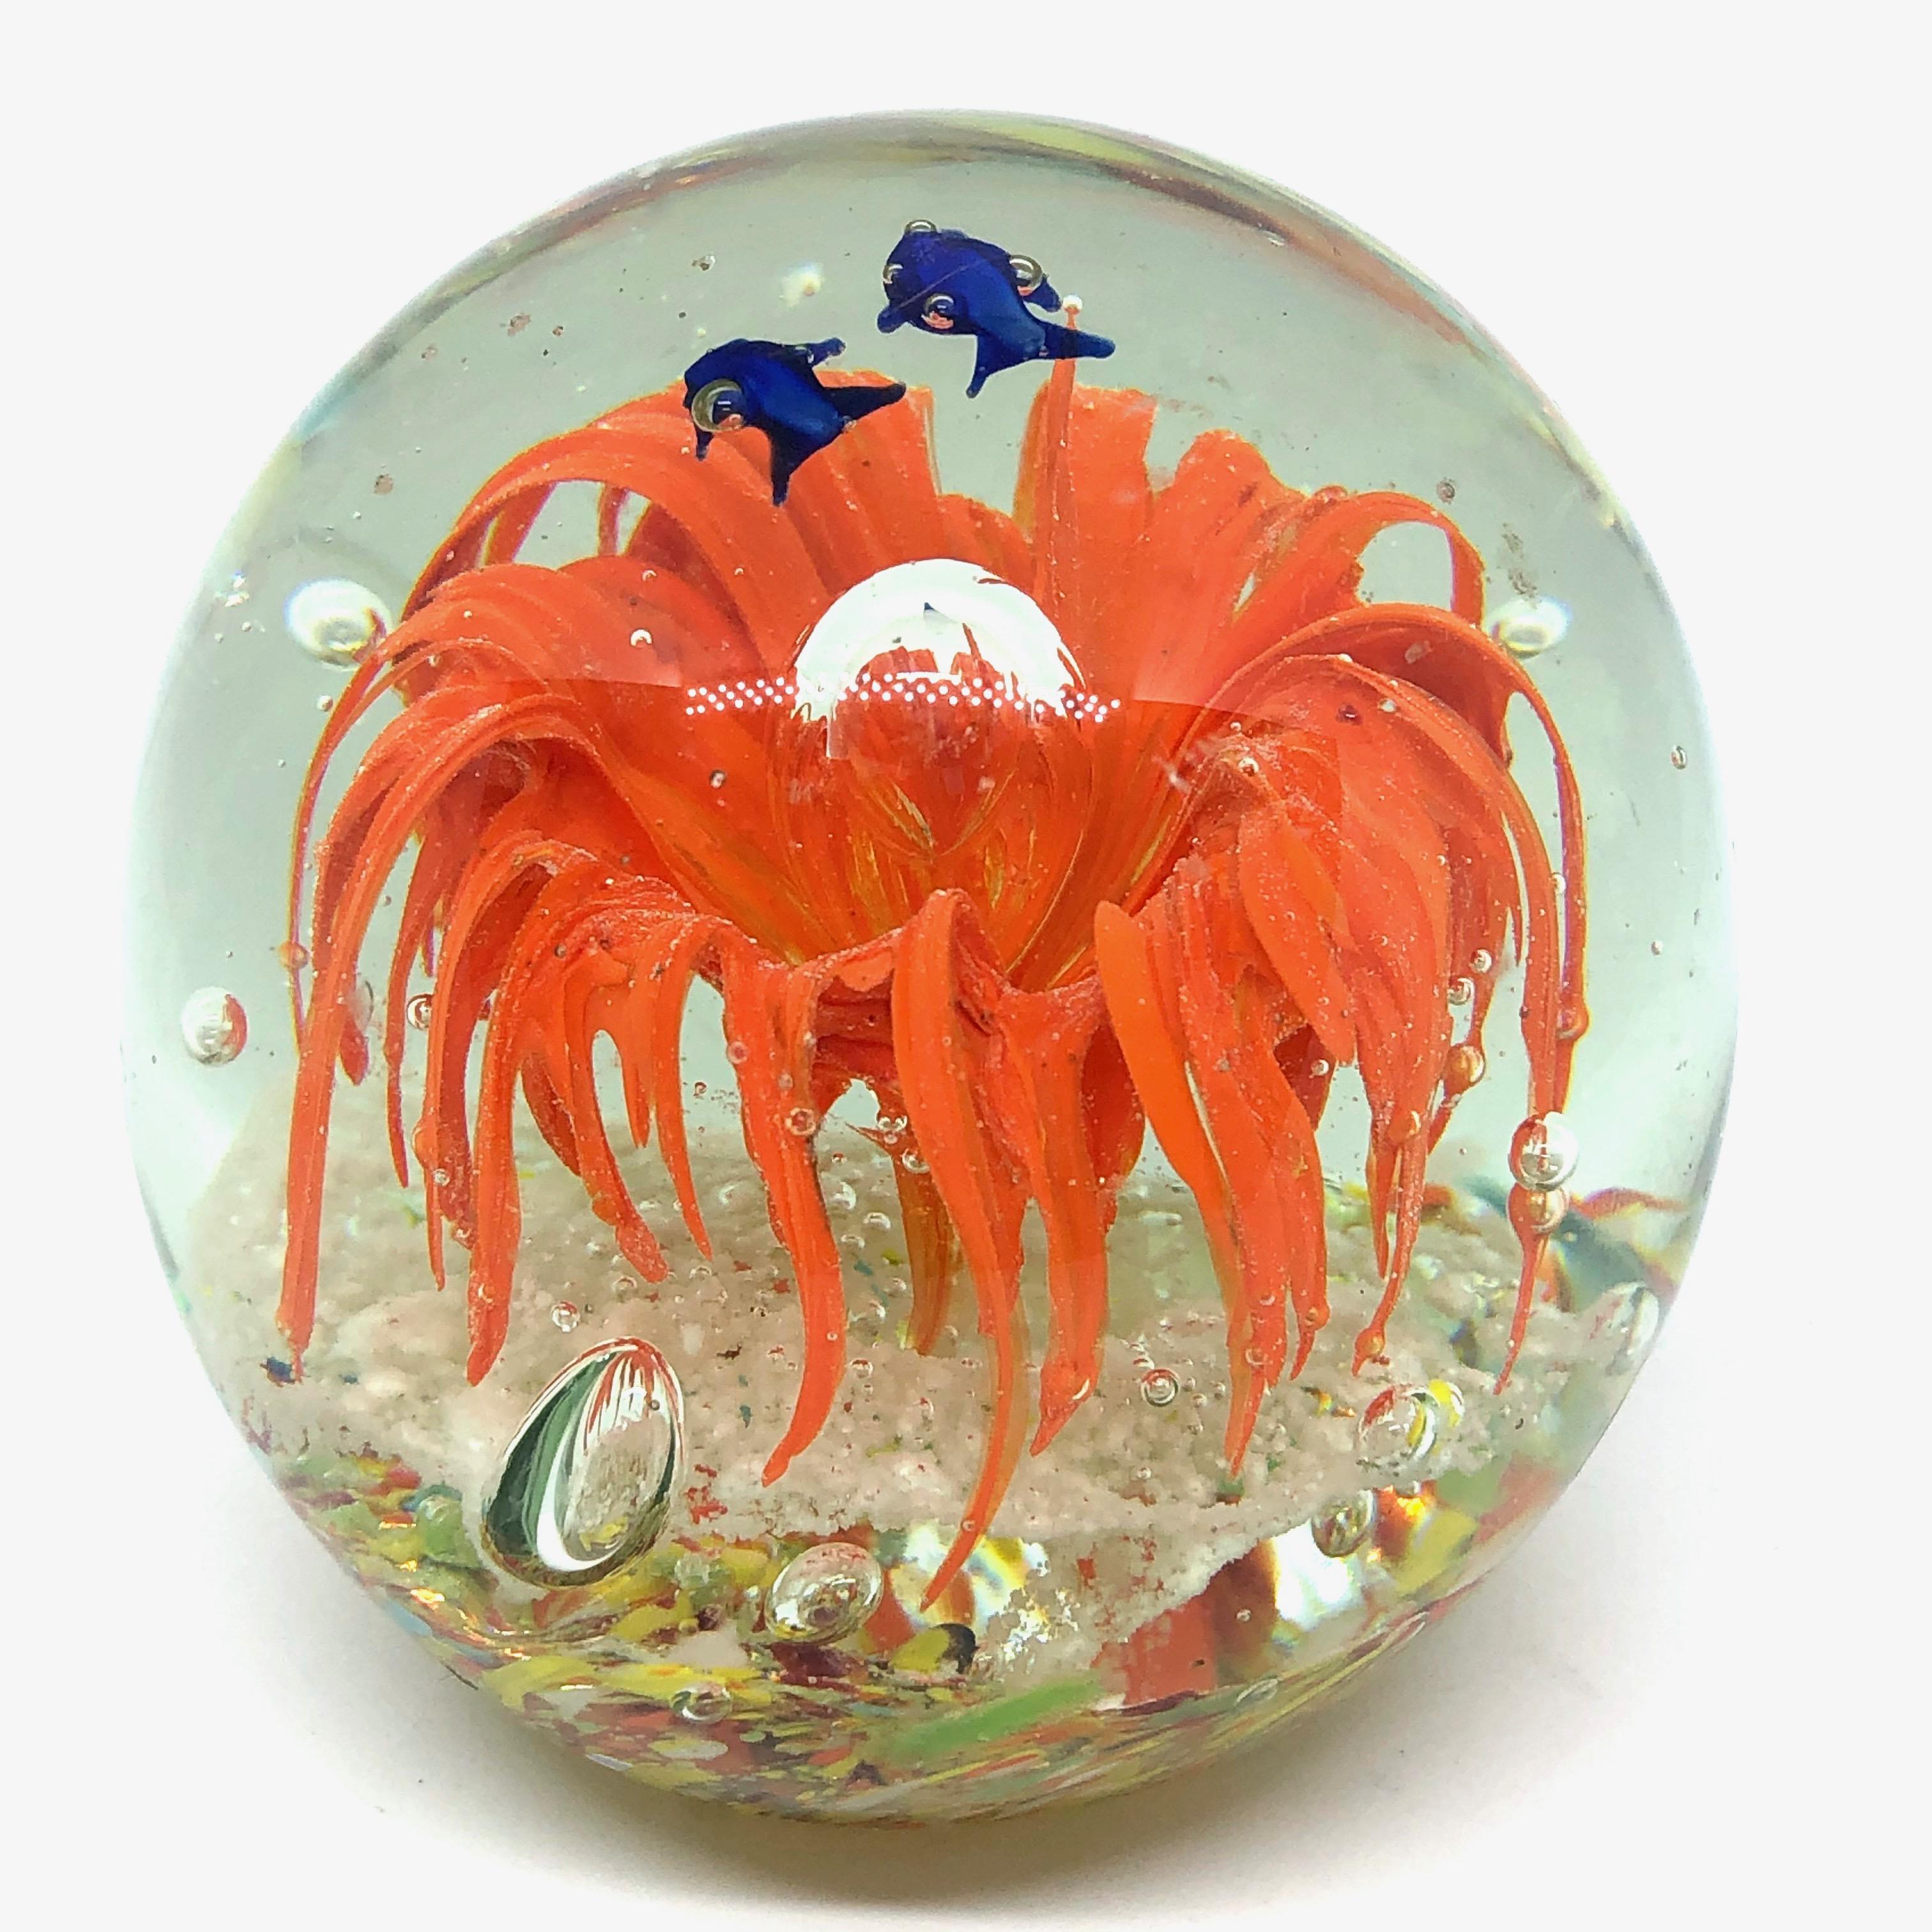 Beautiful Murano hand blown aquarium Italian art glass paper weight. Showing some blue fishes in a coral reef, floating on controlled bubbles. Colors are a blue, orange and clear. A beautiful nice addition to your desktop or as a decorative piece in